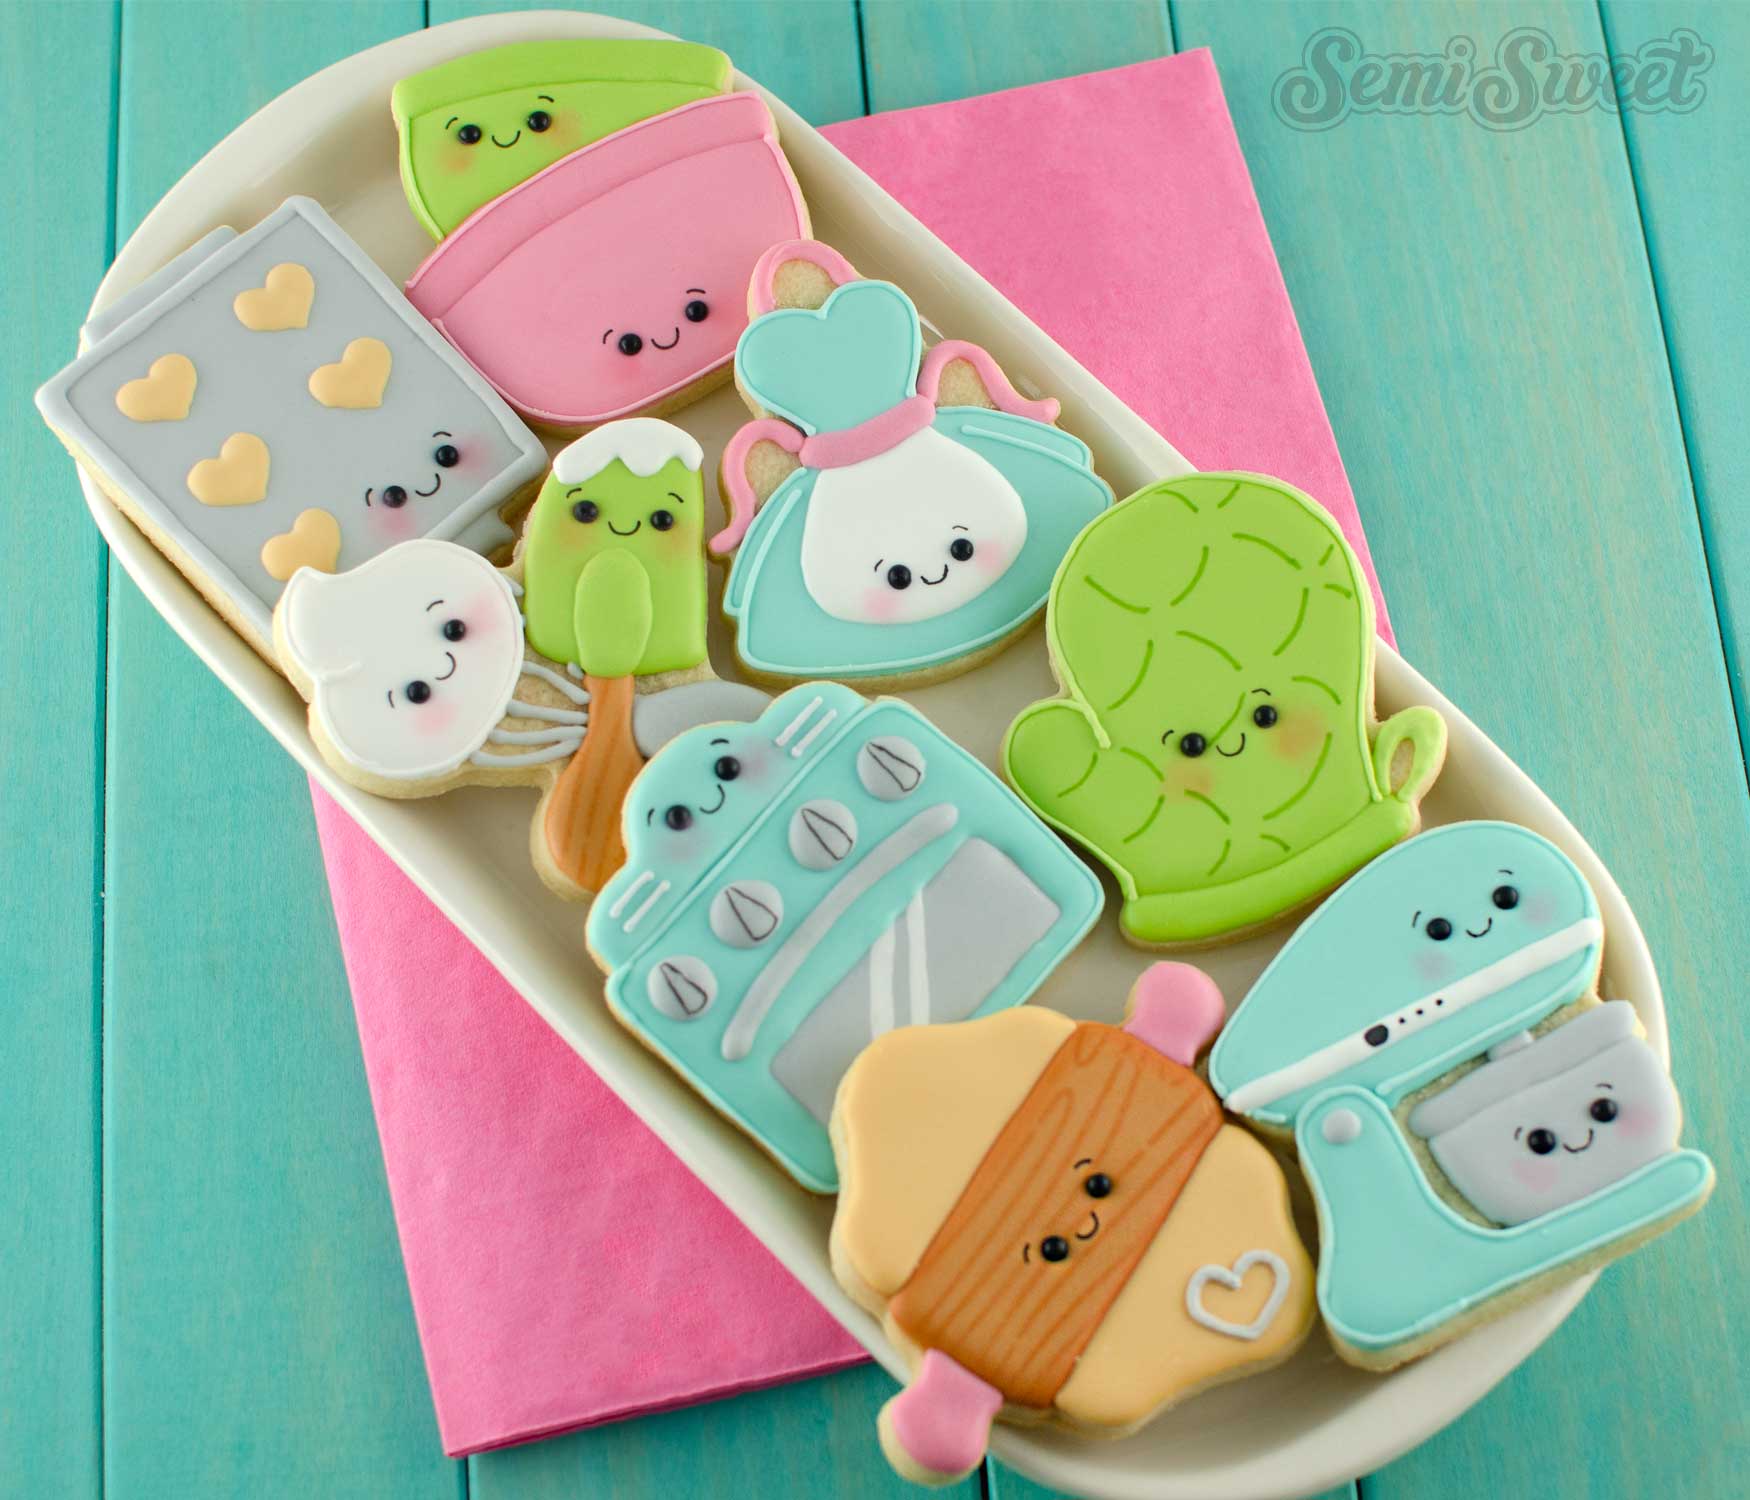 decorated baking cookies